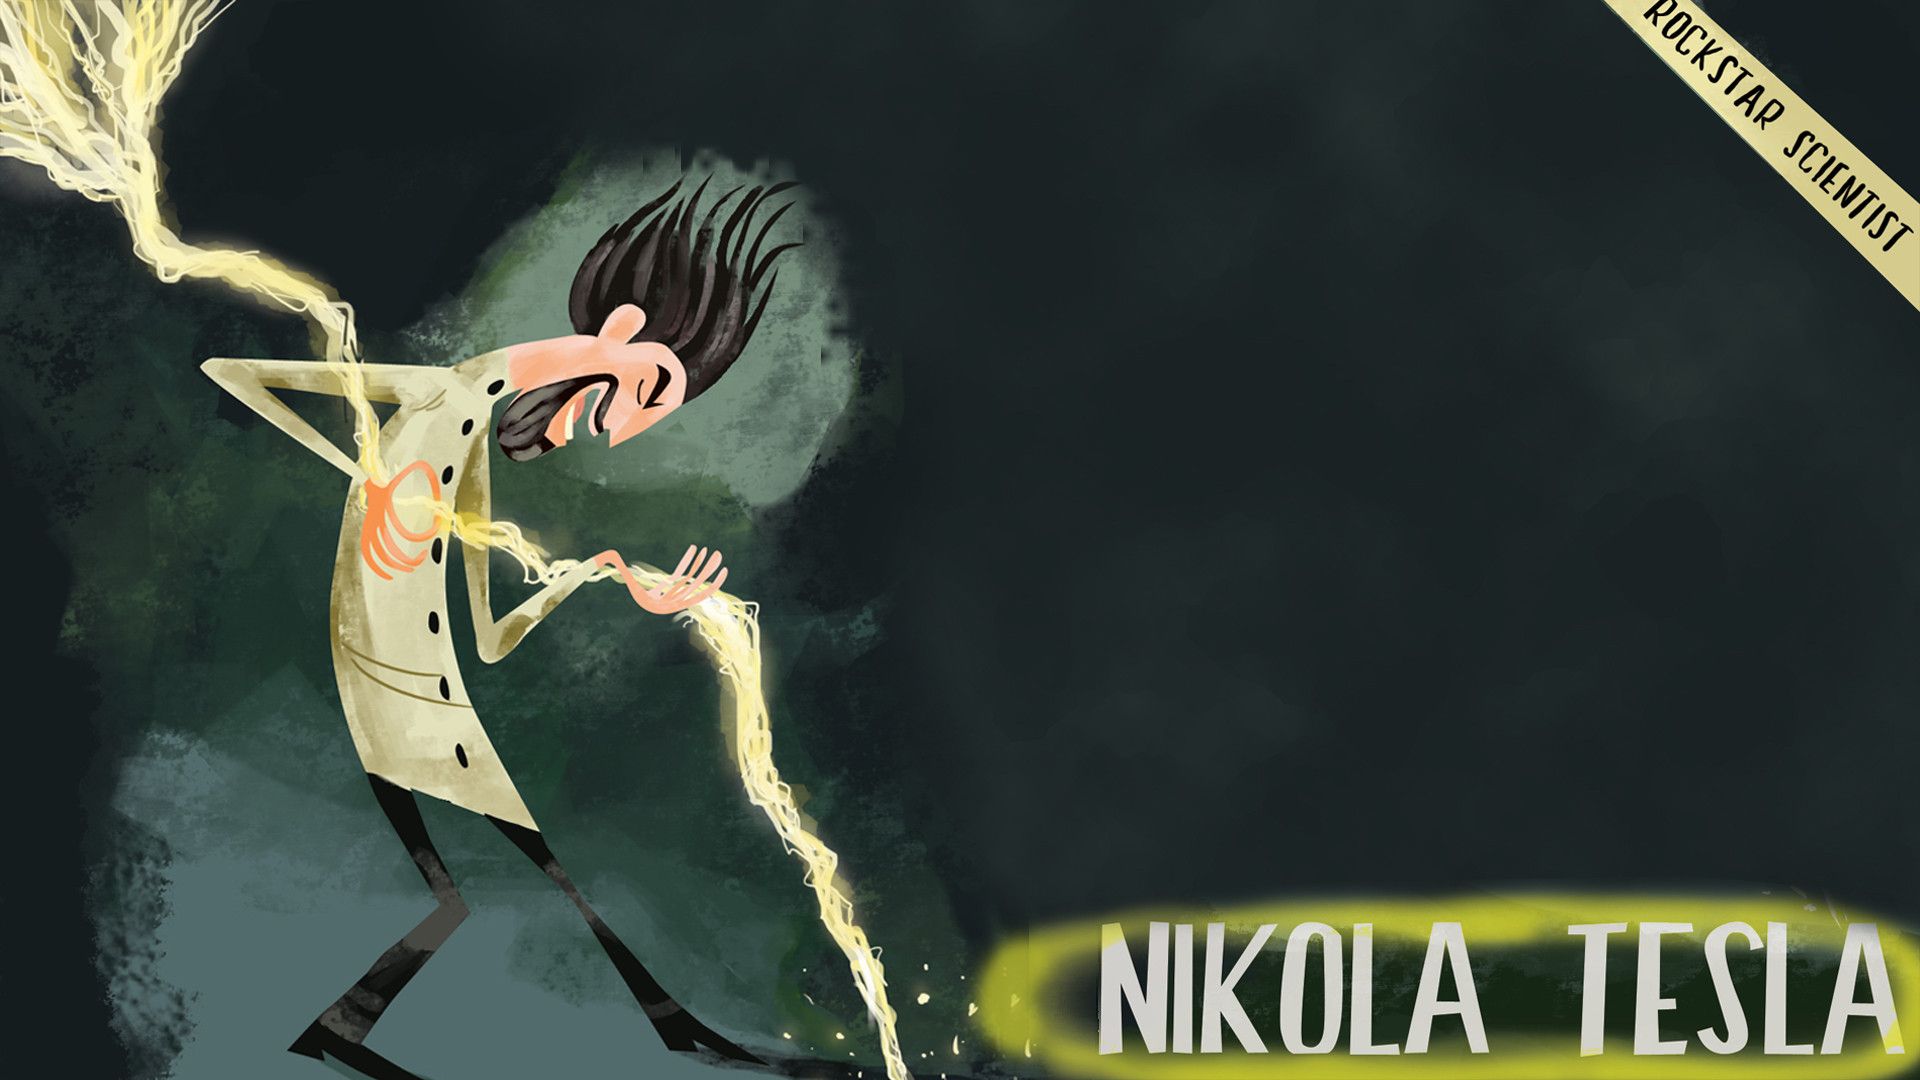 Hi Res Nikola Tesla Rockstar Scientist poster from Cloudy With a